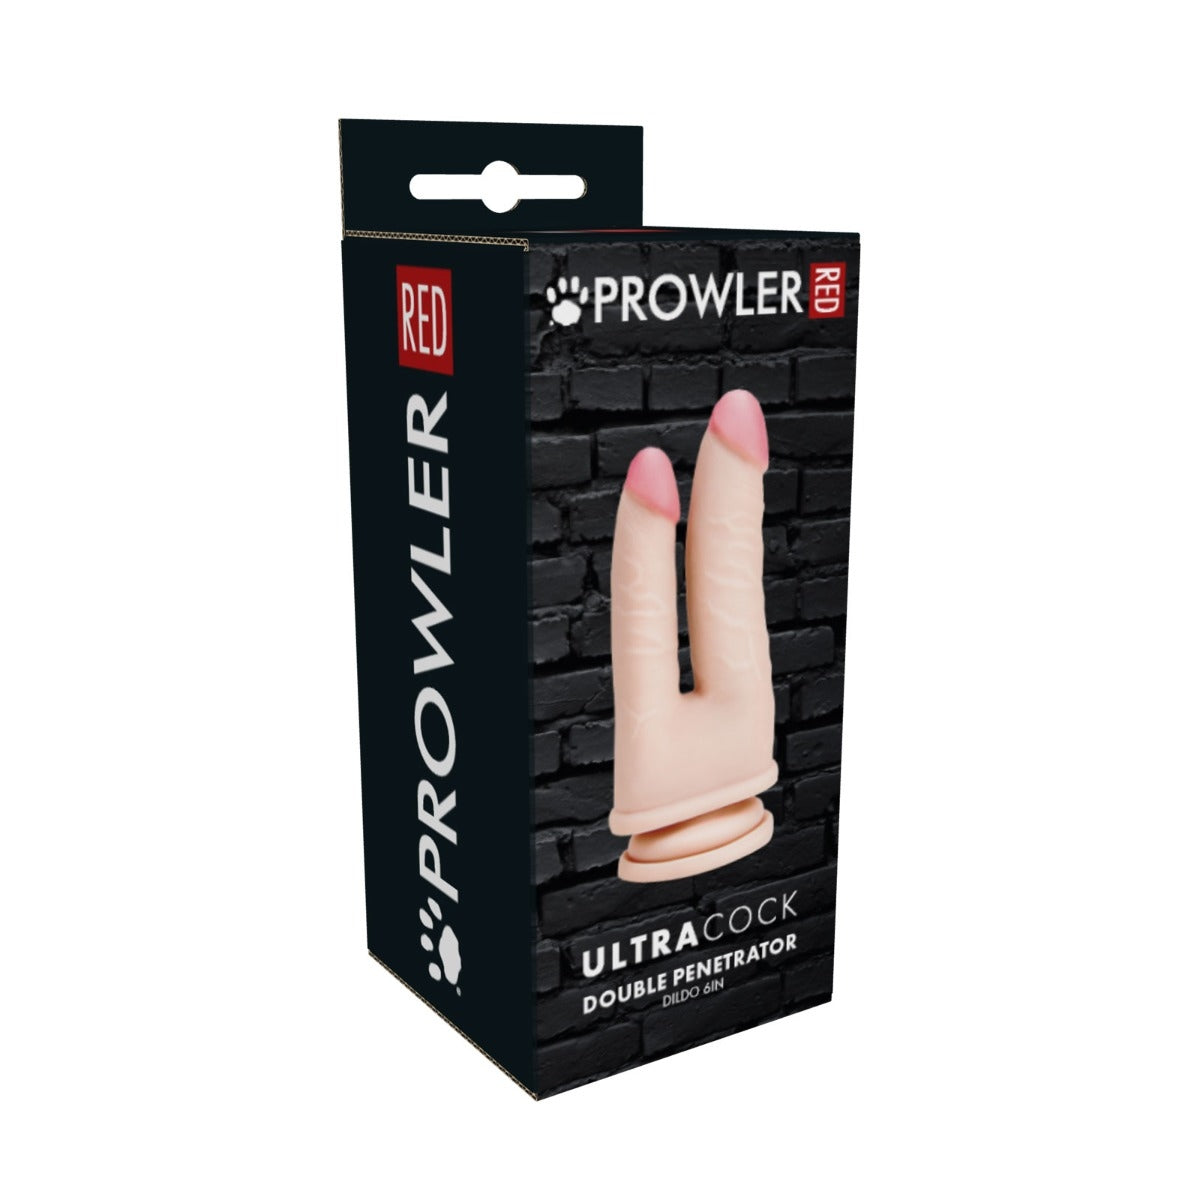 Prowler RED Ultra Cock Double Penetrator Dildo Pink 6 Inch